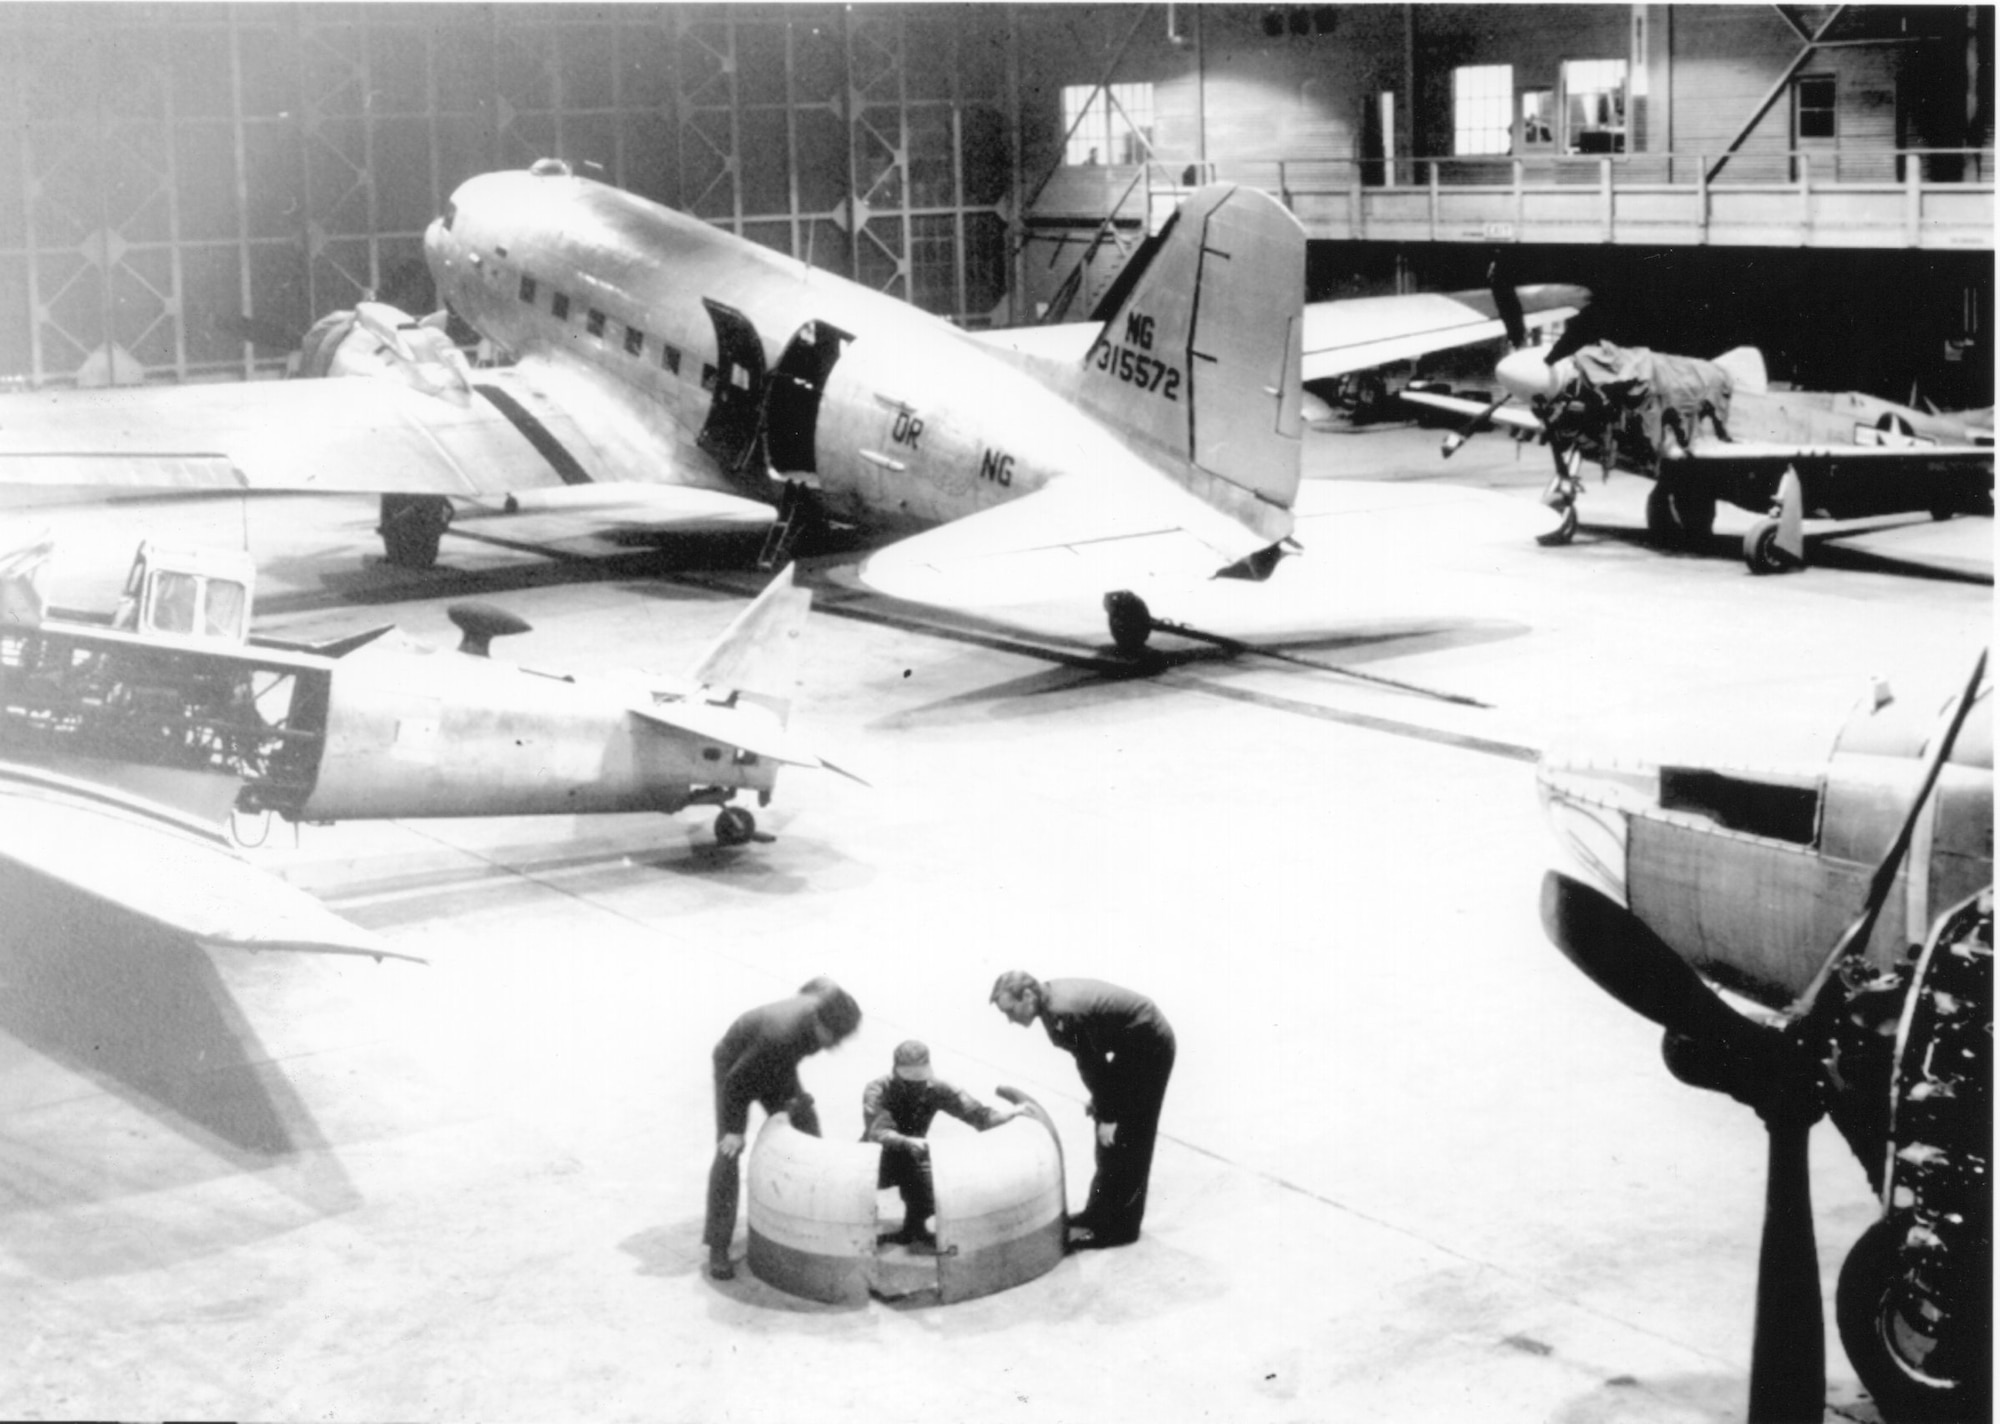 Aircraft of the Oregon (Air) National Guard in the immediate post-World War II period undergo maintenance at Portland Air Base, circa 1947.  Seen clockwise starting at the top are a C-47A Skytrain transport, P-51D Mustang fighter, A-26C Invader attack bomber and AT-6C Texan trainer.  The lack of national insignia on the C-47 is indicative of the transition period for Guard aircraft markings seen as the ANG re-established itself after WWII.   Perhaps a Caretaker is busy showing the other men in the picture a point about aircraft maintenance.  (Courtesy 142nd Fighter Wing History Archives)